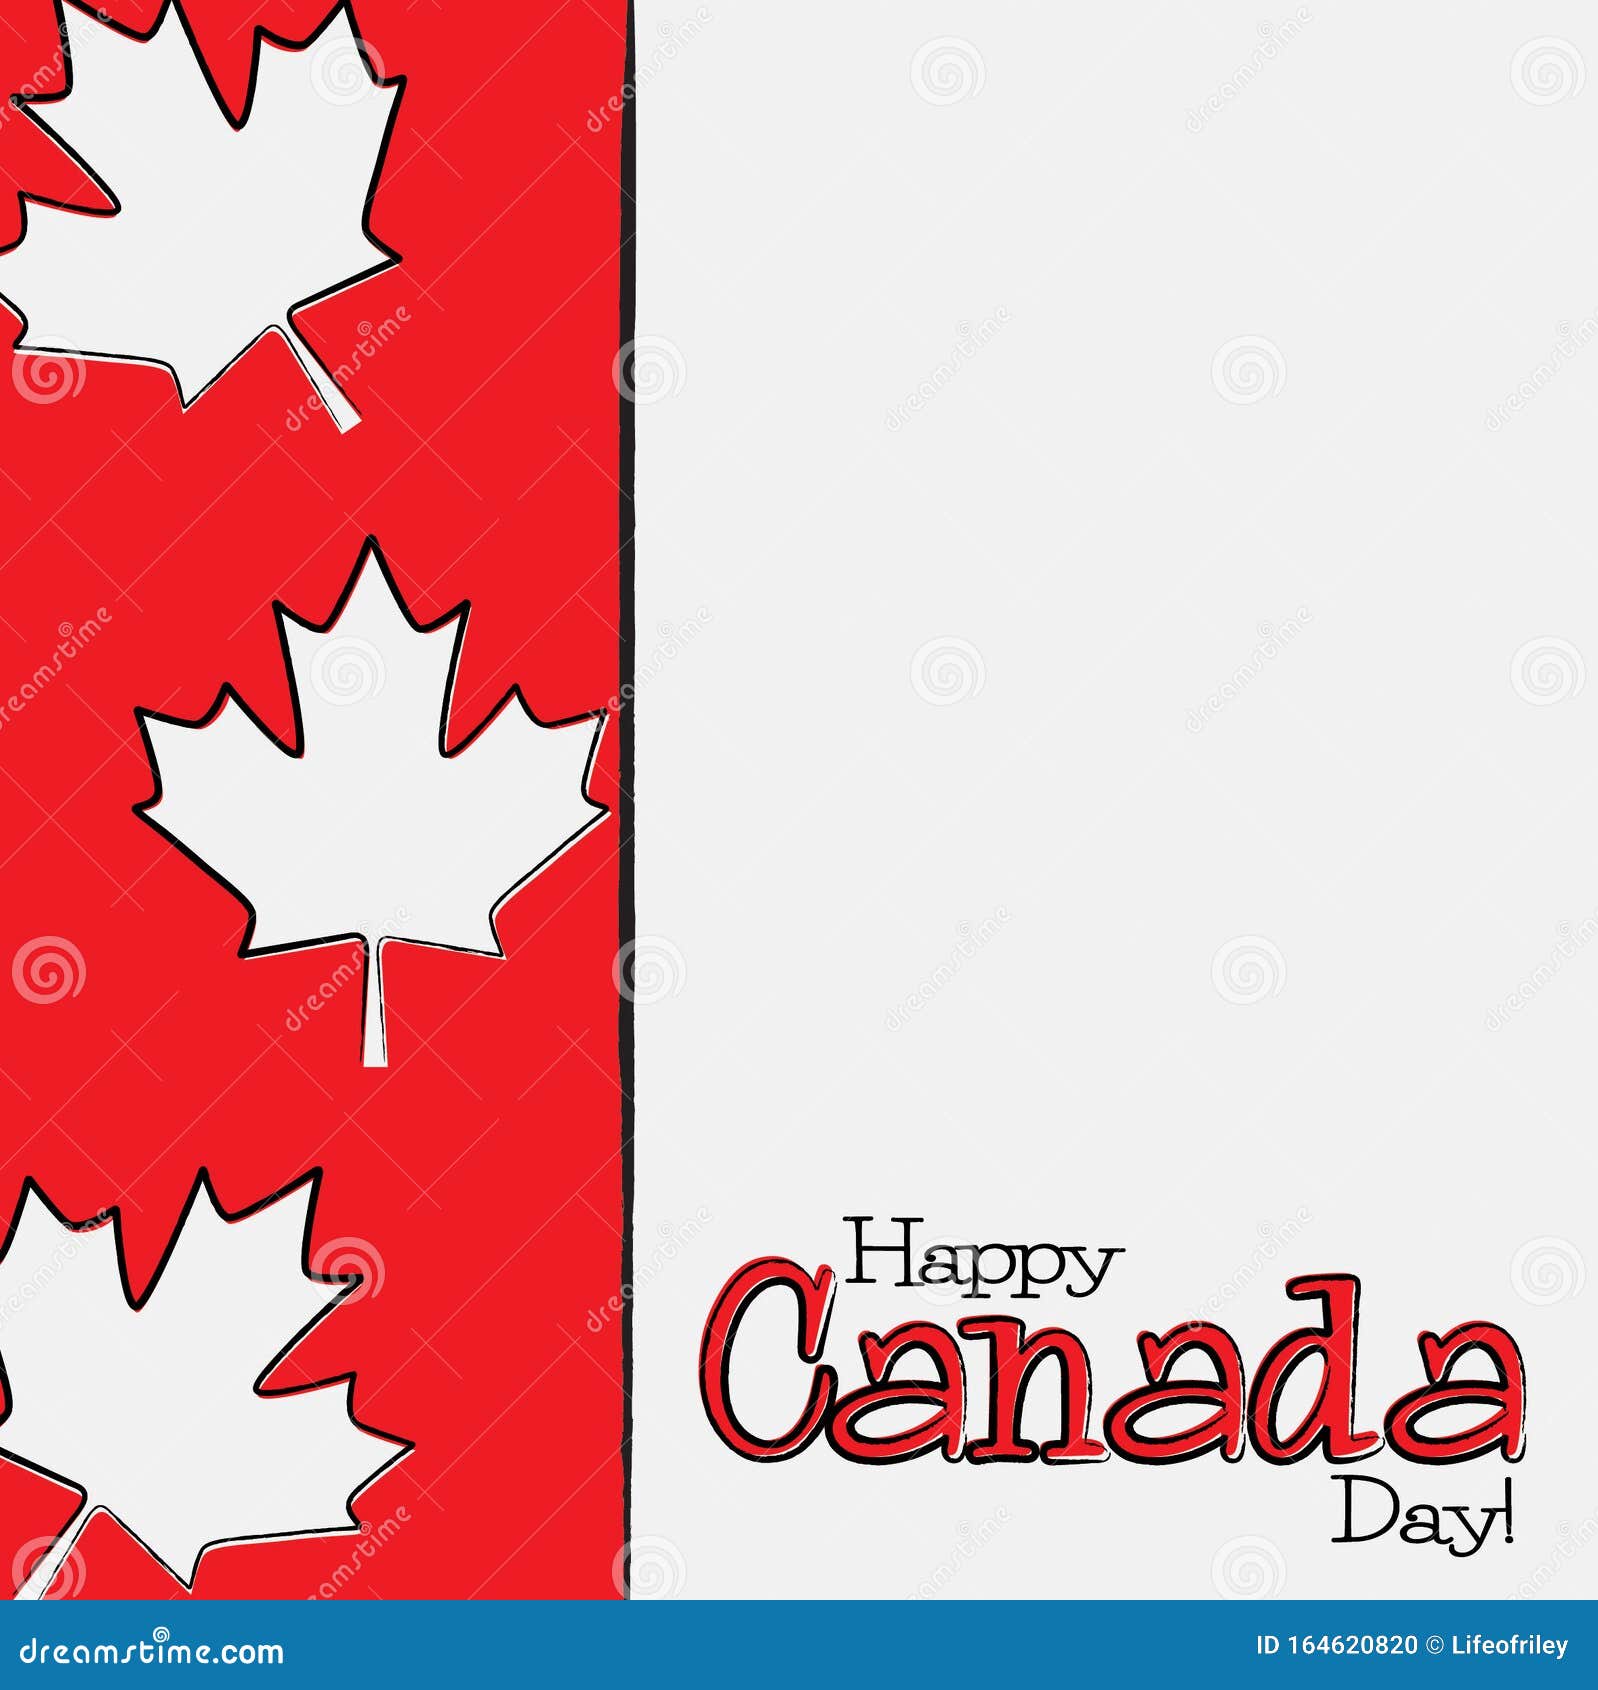 Happy Canada Day Maple Leaf Card Stock Vector - Illustration of draw ...